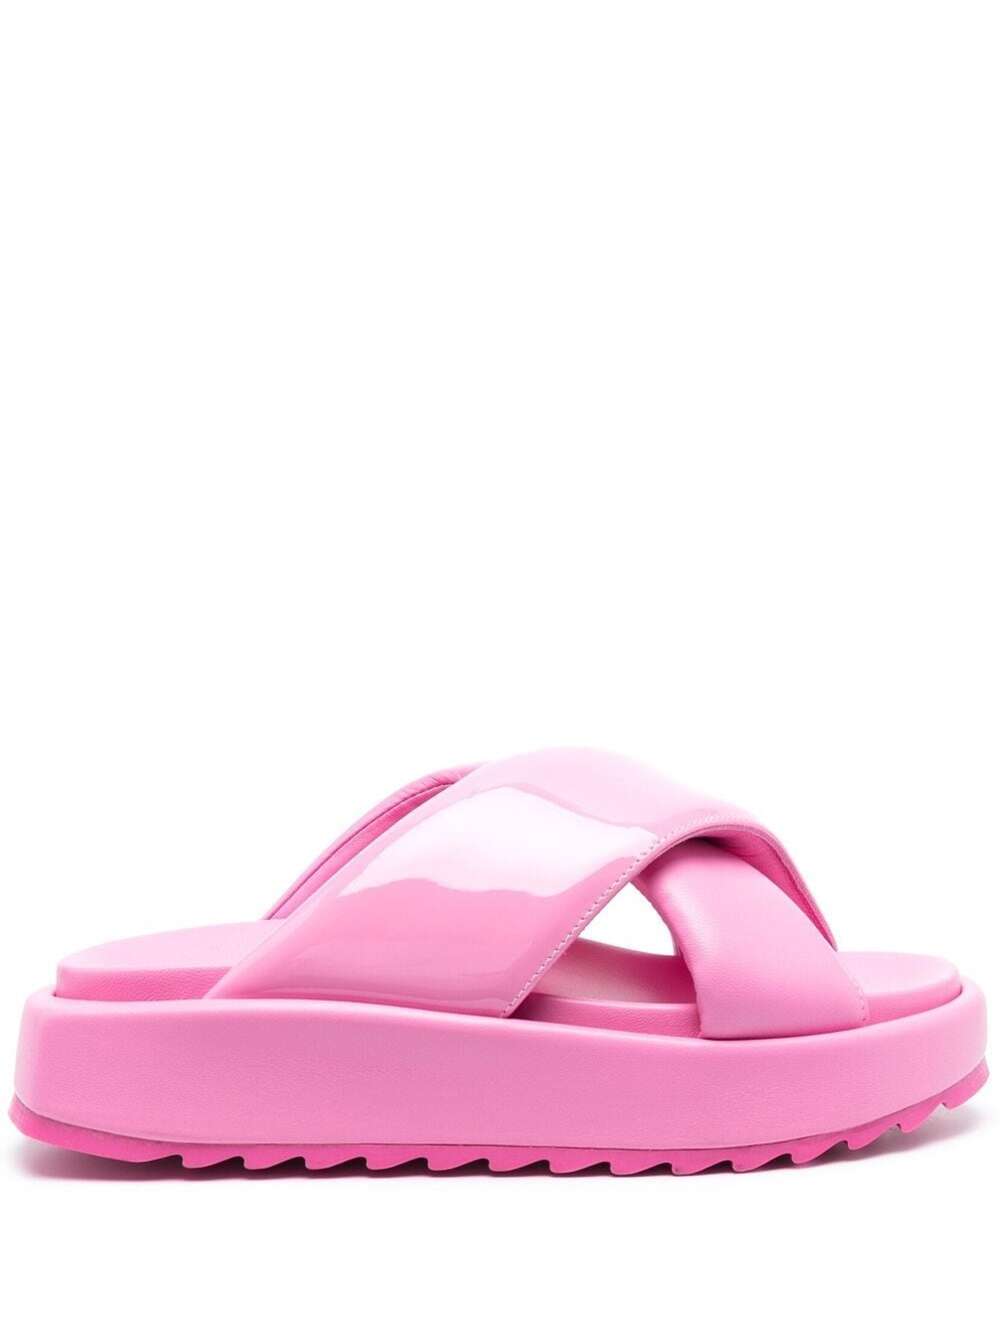 Pink Crossover Strap Slides Glossy Finish In Leather Woman